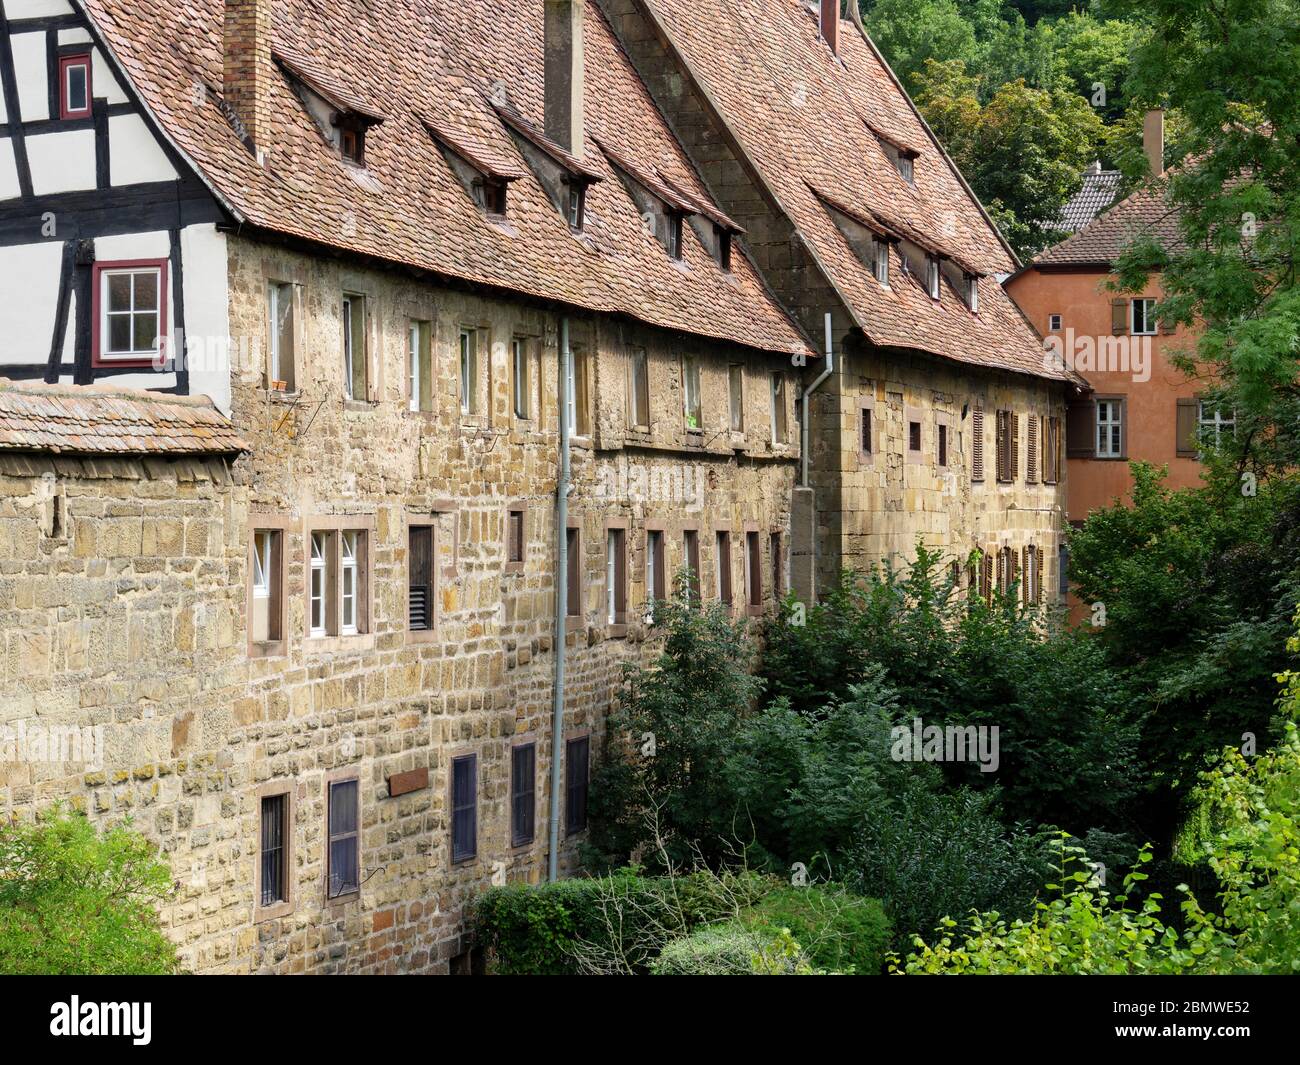 Kloster Maulbronn, UNESCO Welterbe, Bade-Wurtemberg, Allemagne Banque D'Images